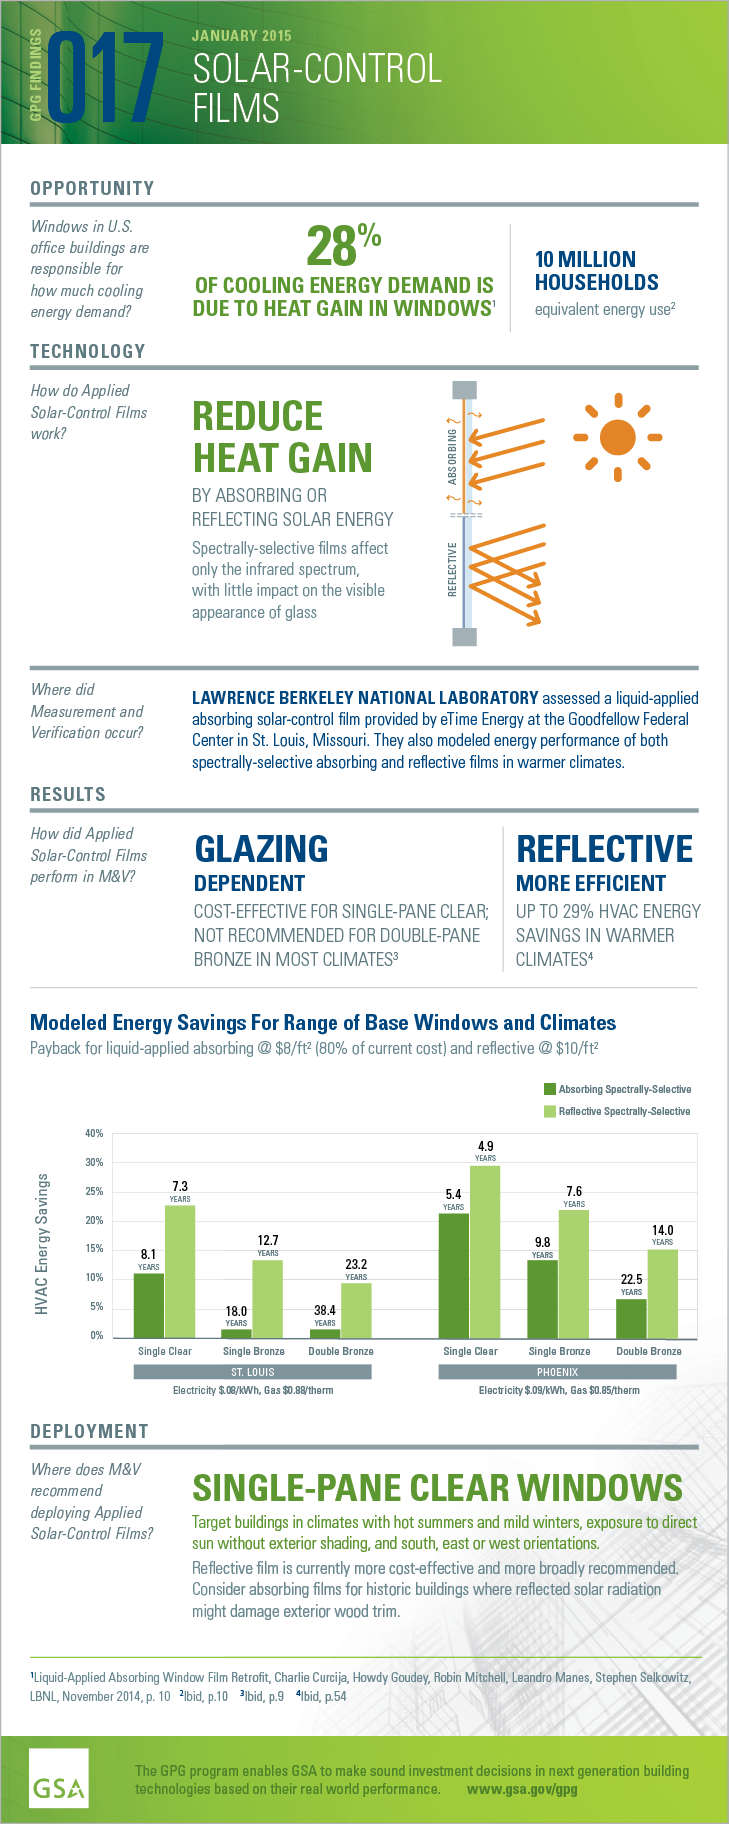 Download the PDF of the full-size infographic for GPG017 Solar Control Films.